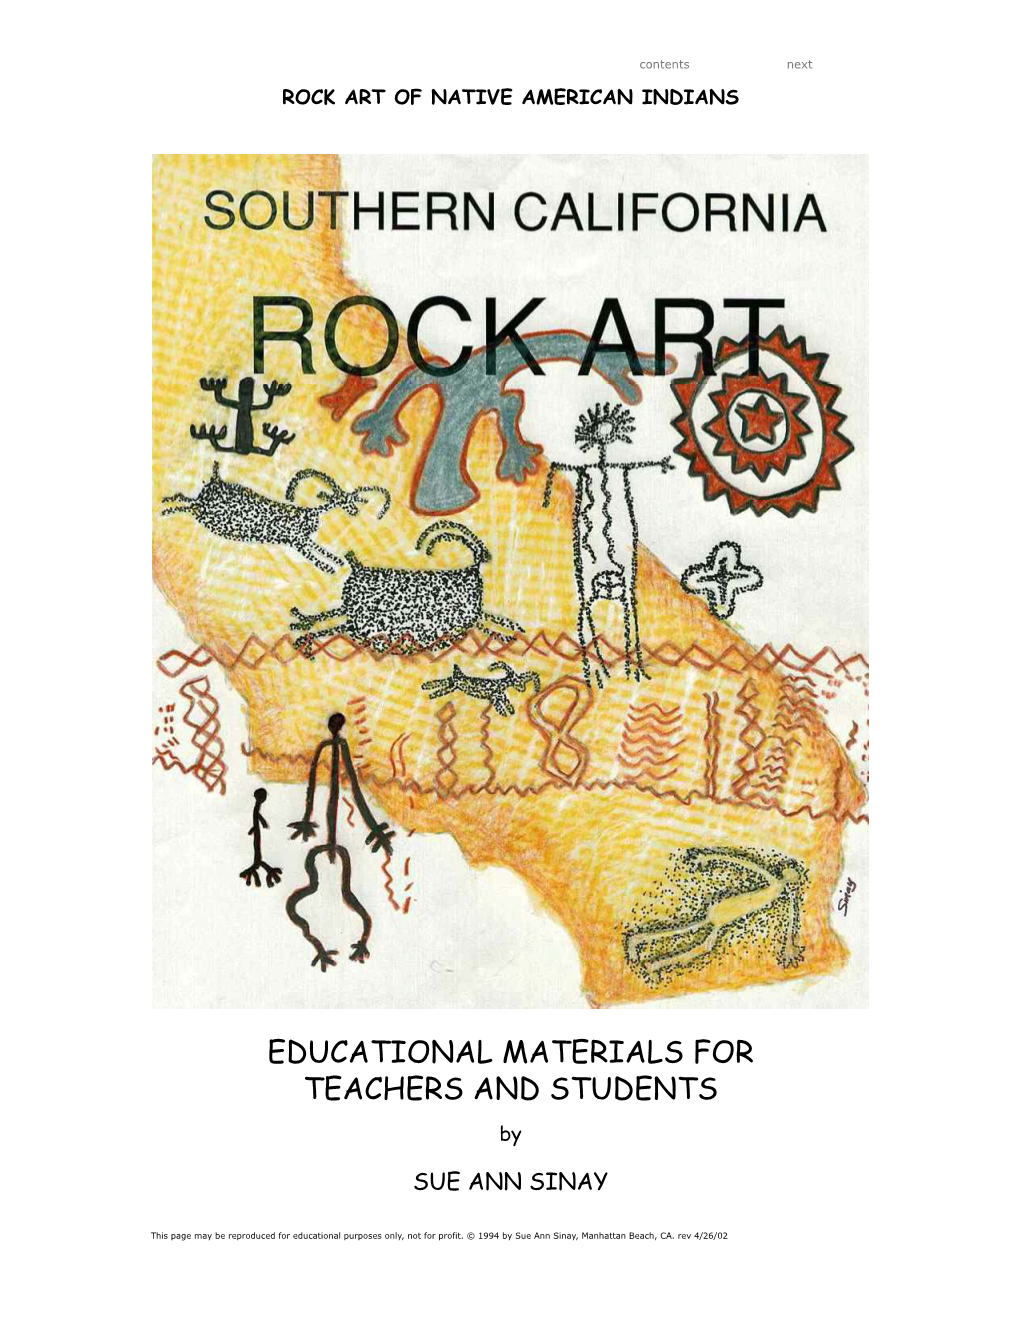 Rock Art of Native American Indians in Southern California